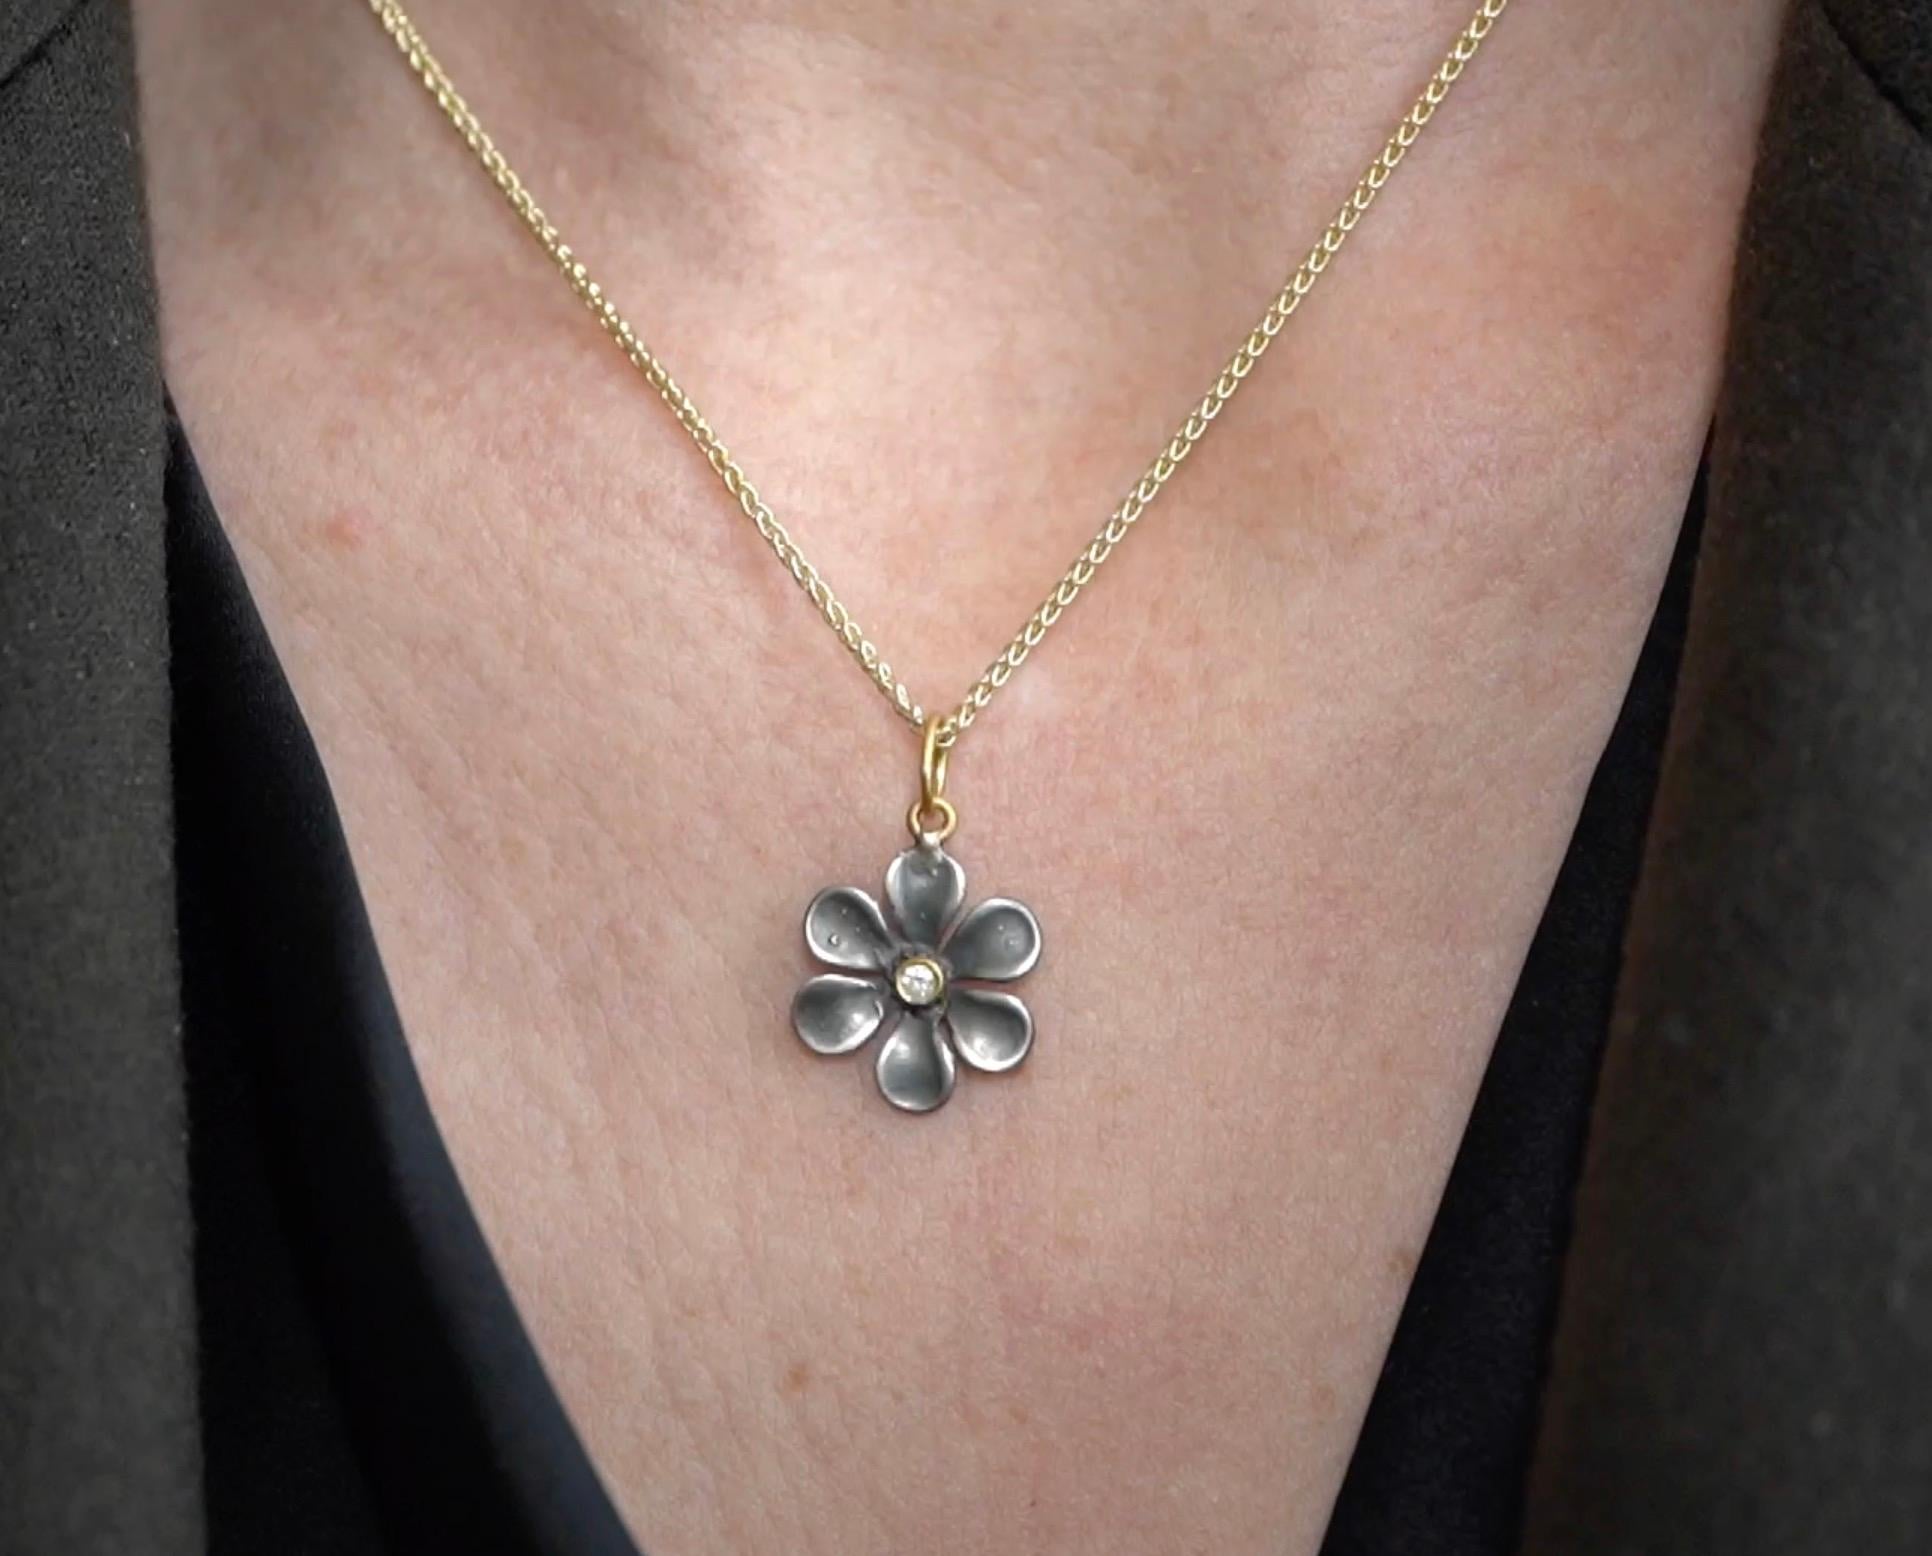 Medium, Sterling Silver Flower Charm Pendant Necklace with Diamond, 24kt Gold and Silver by Prehistoric Works of Istanbul, Turkey. Diamond - 0.02cts. Measures: 16mm x 16mm, comes with 16